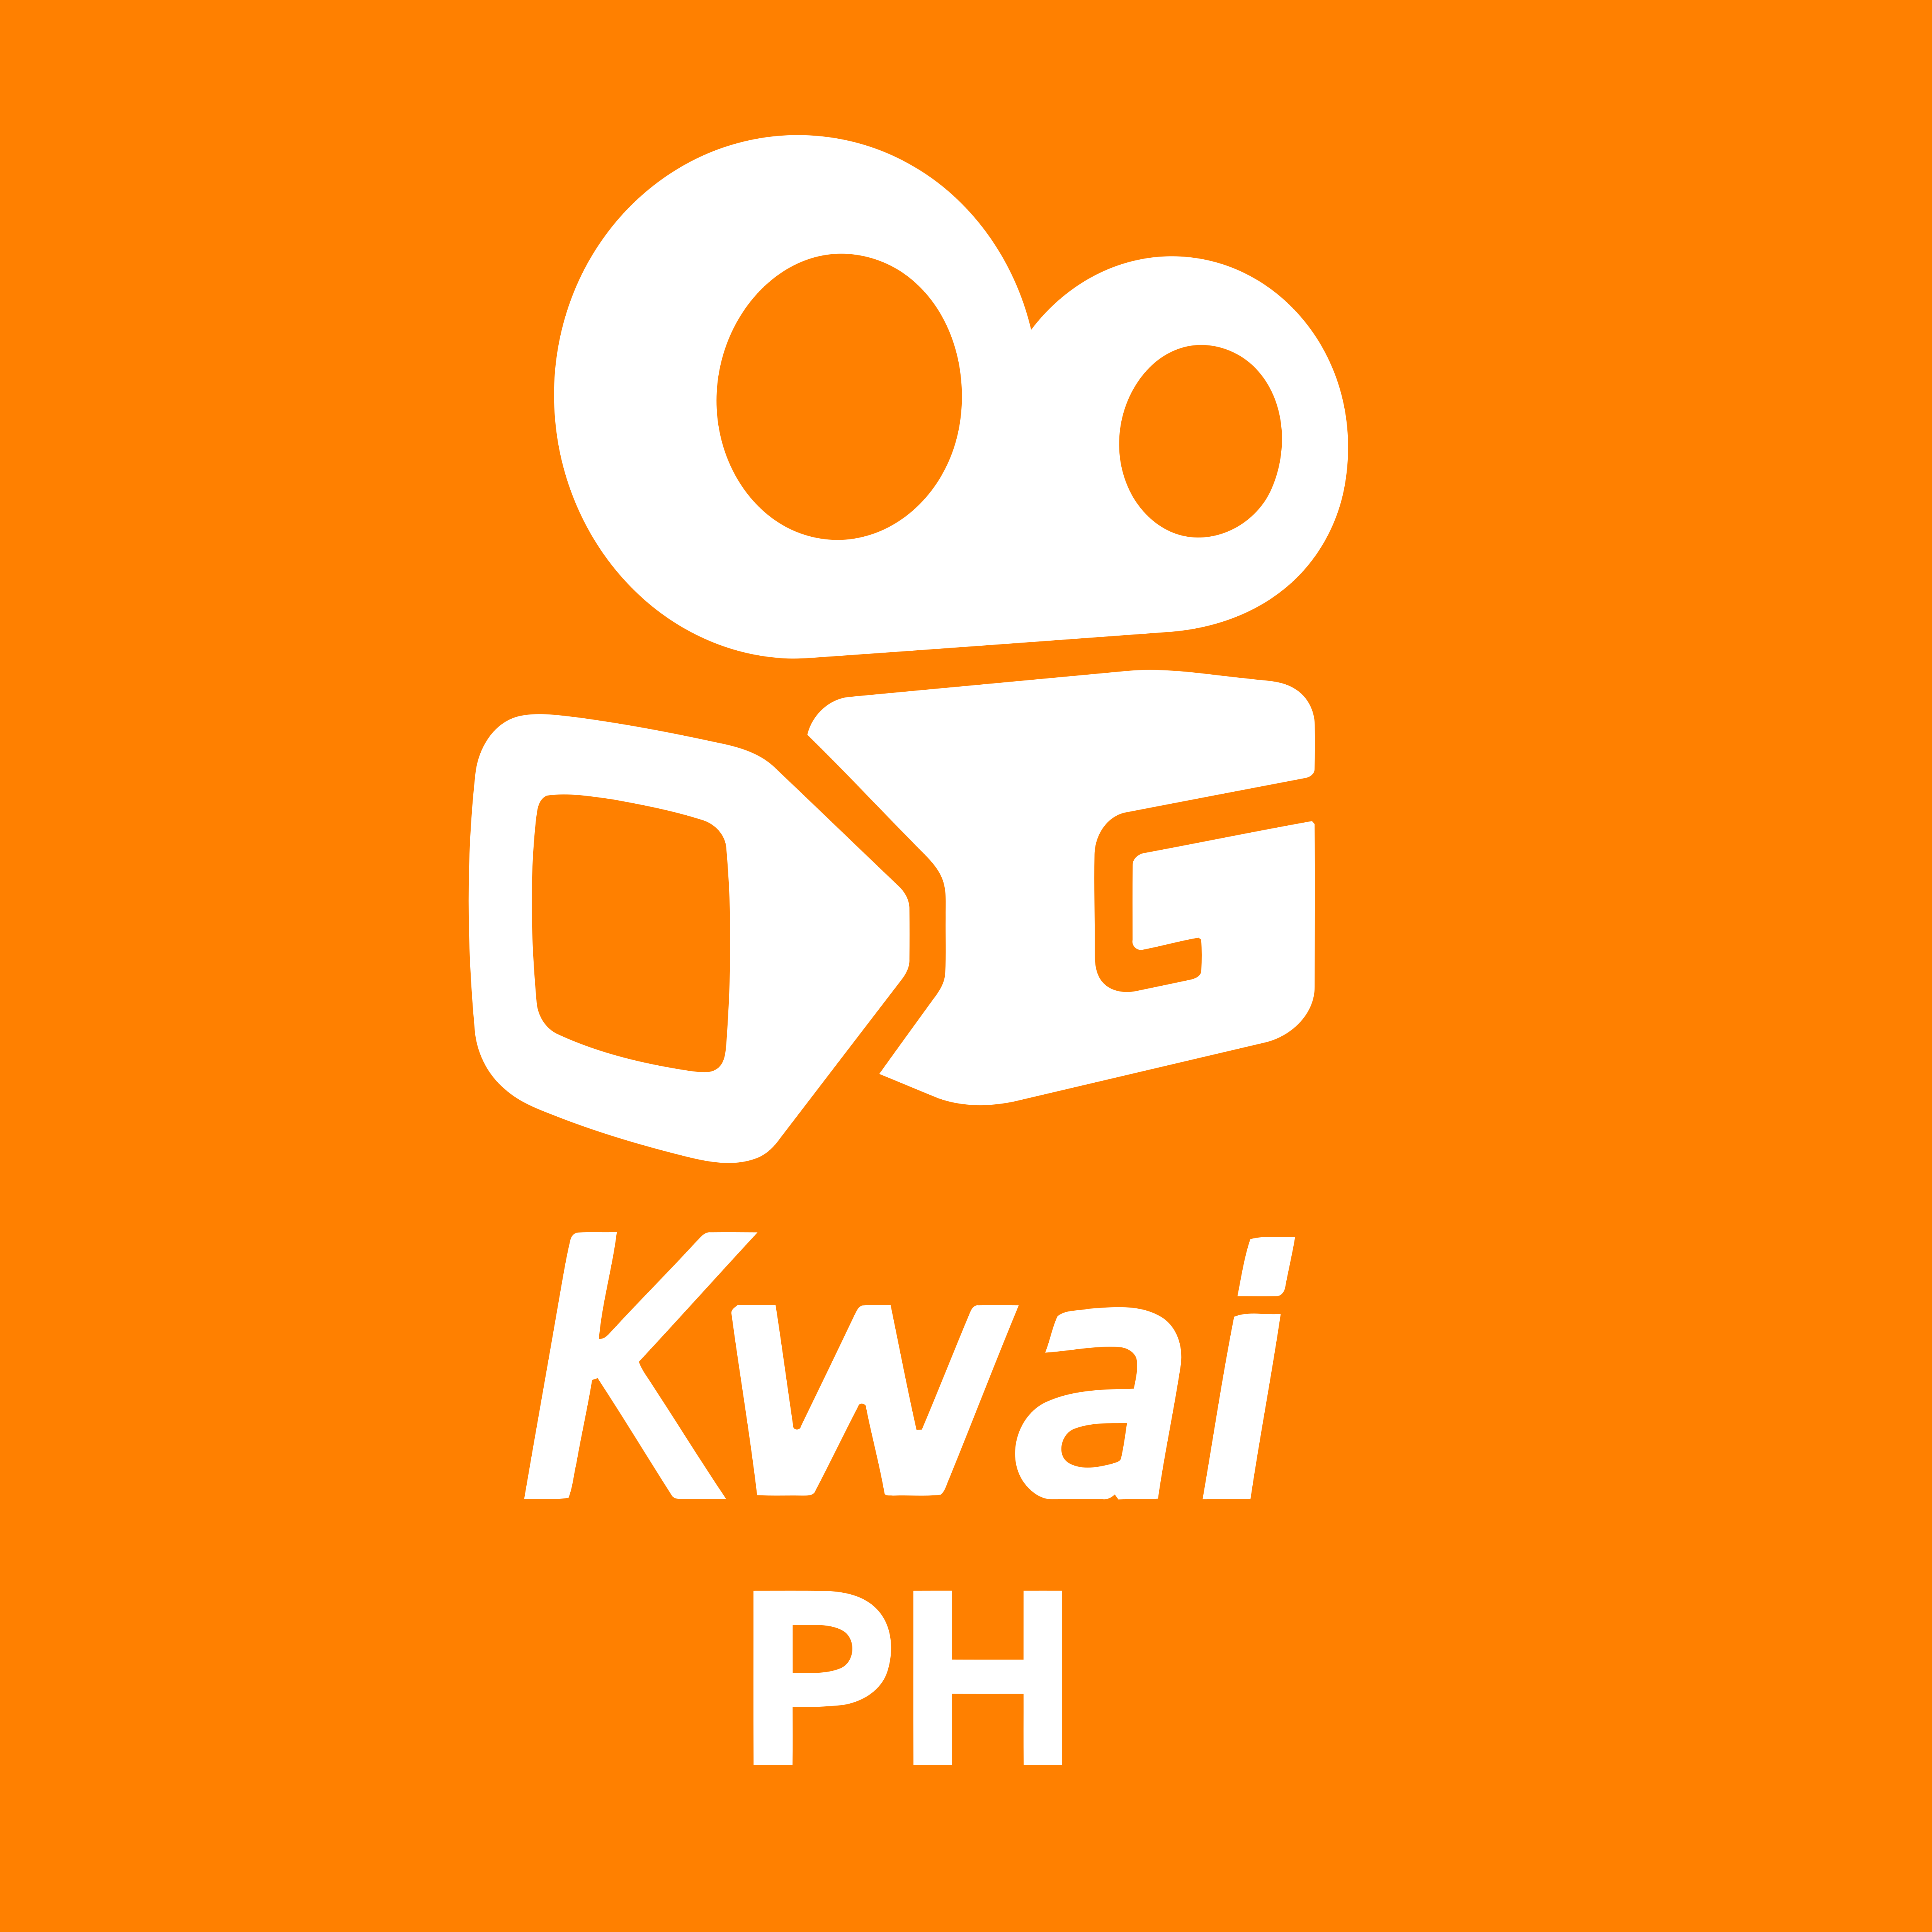 kwai Logo PNG Vector (EPS) Free Download